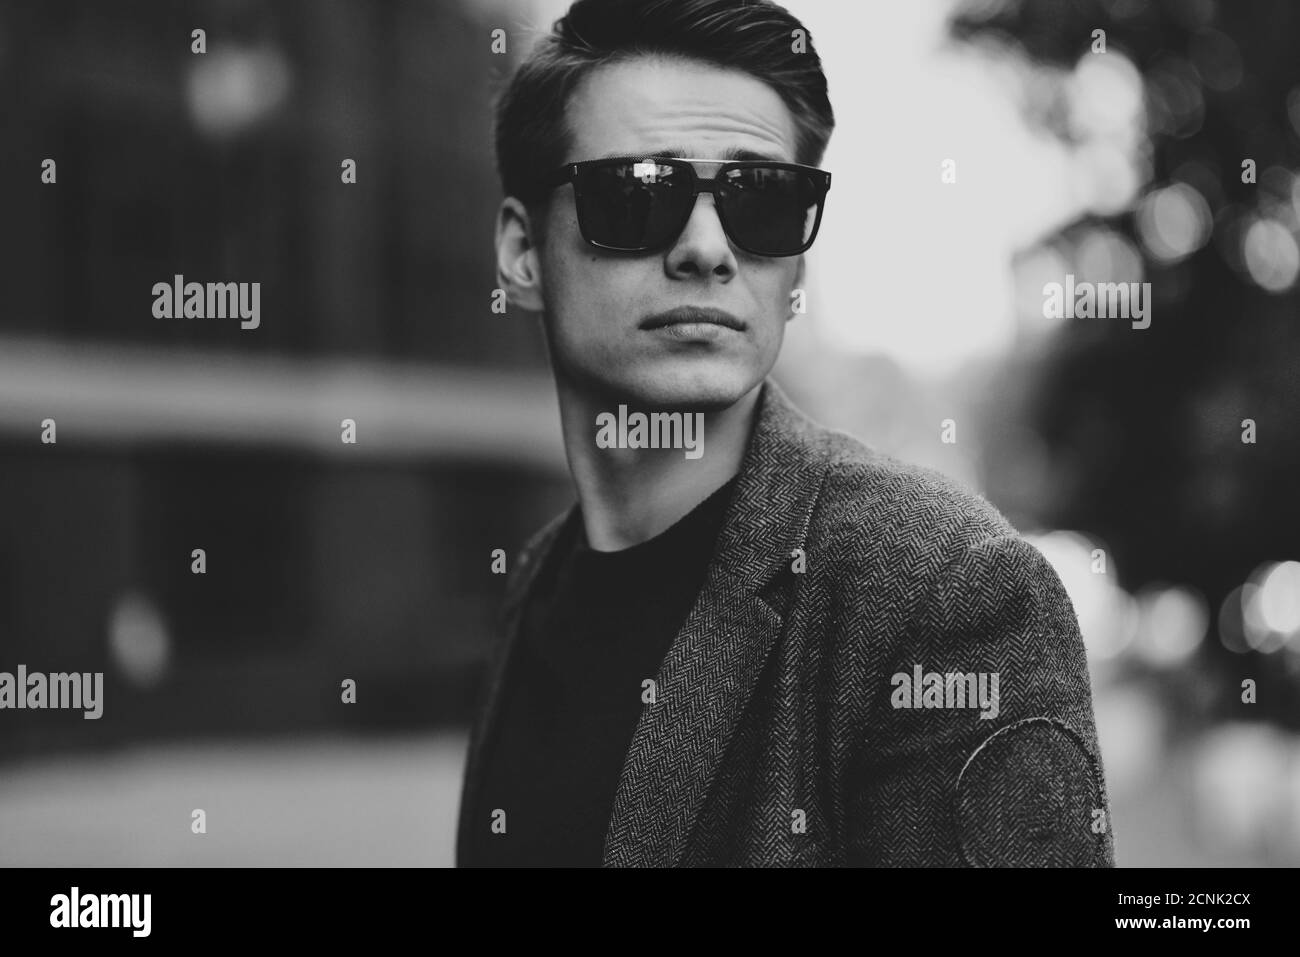 Serious cool guy with sunglasses walking at street. Stock Photo